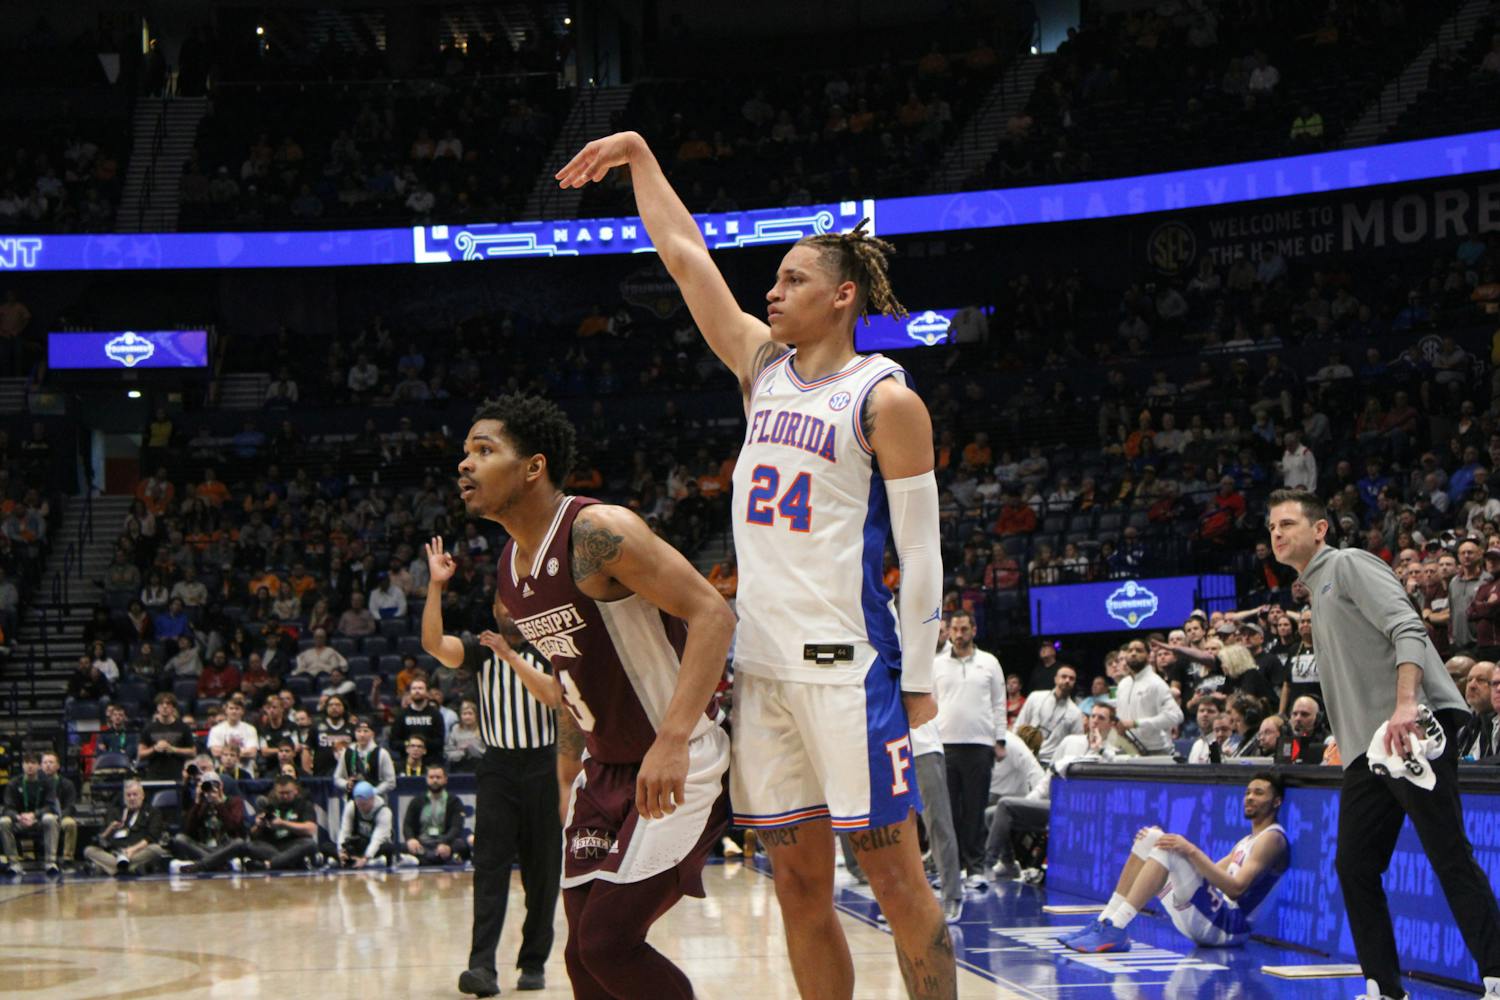 Florida guard Riley Kugel follows through on a jump shot in the Gators' 69-68 loss to the Mississippi State Bulldogs in the second round of the Southeastern Conference Tournament Thursday, March 9, 2023.